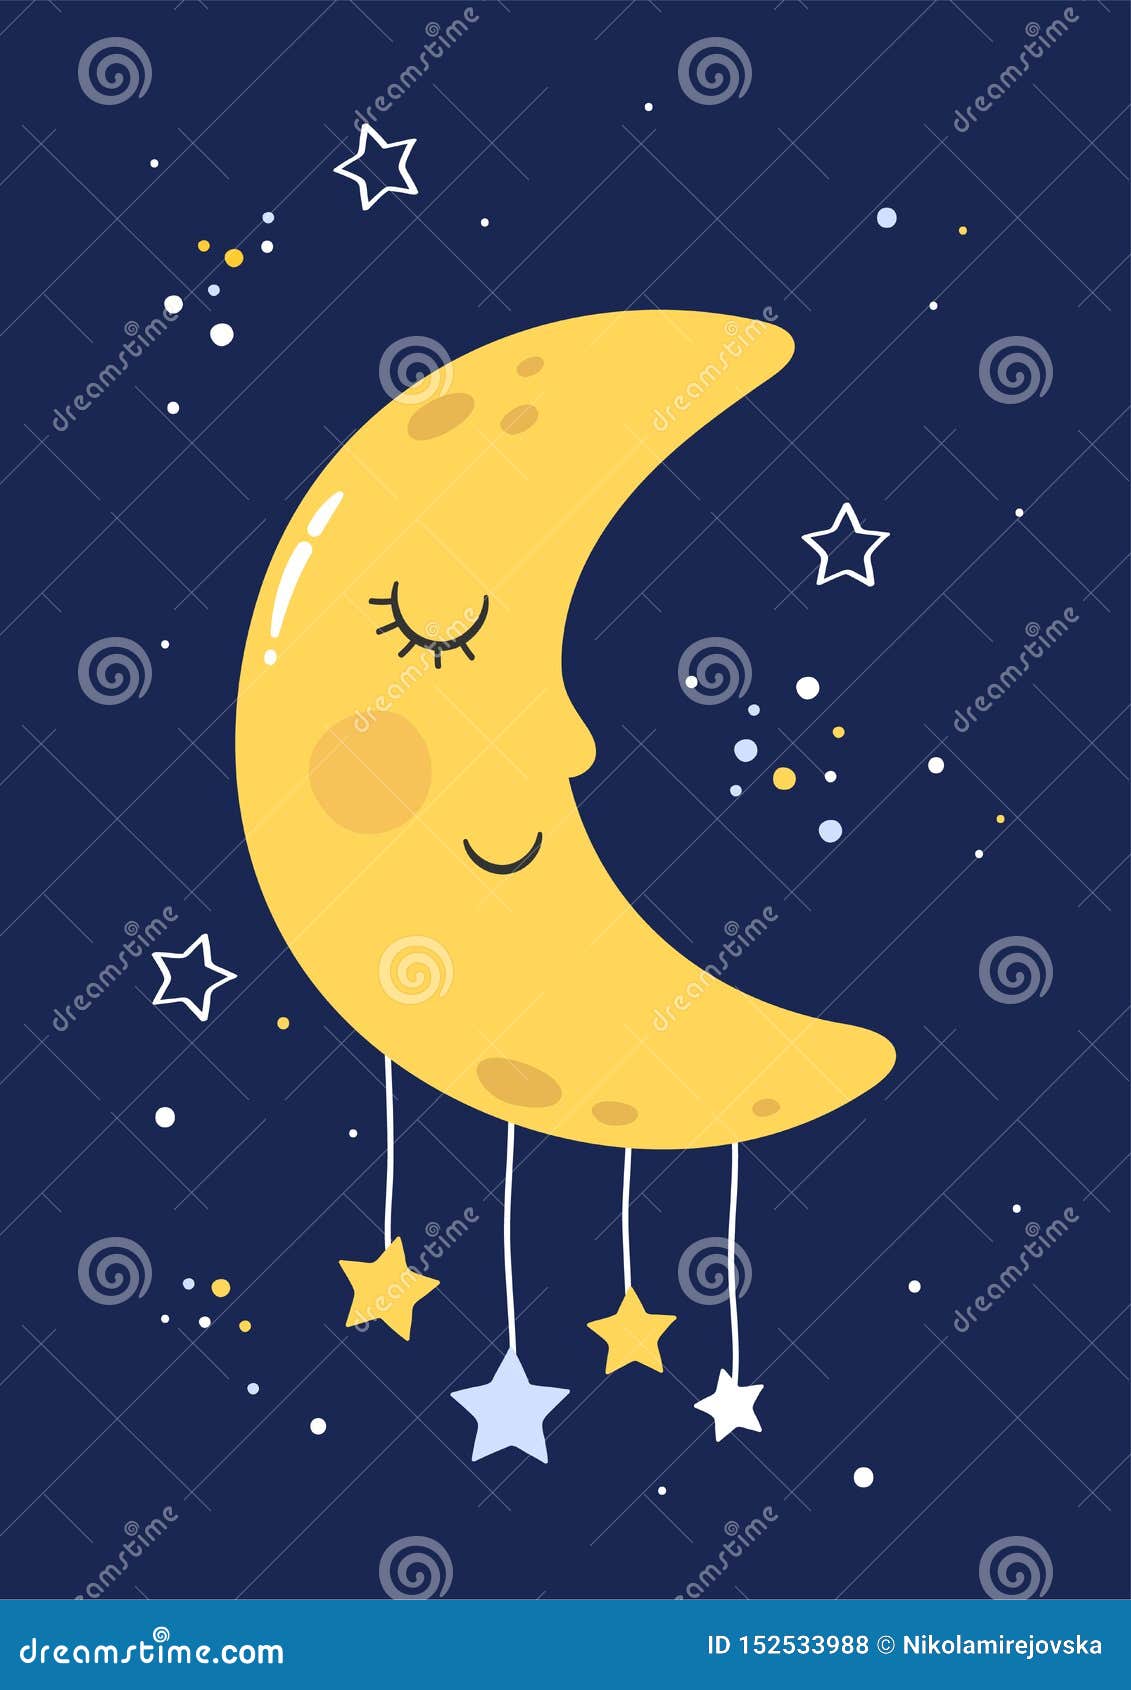 Cute Sleeping Moon with Hanging Stars on Blue Background. Good ...